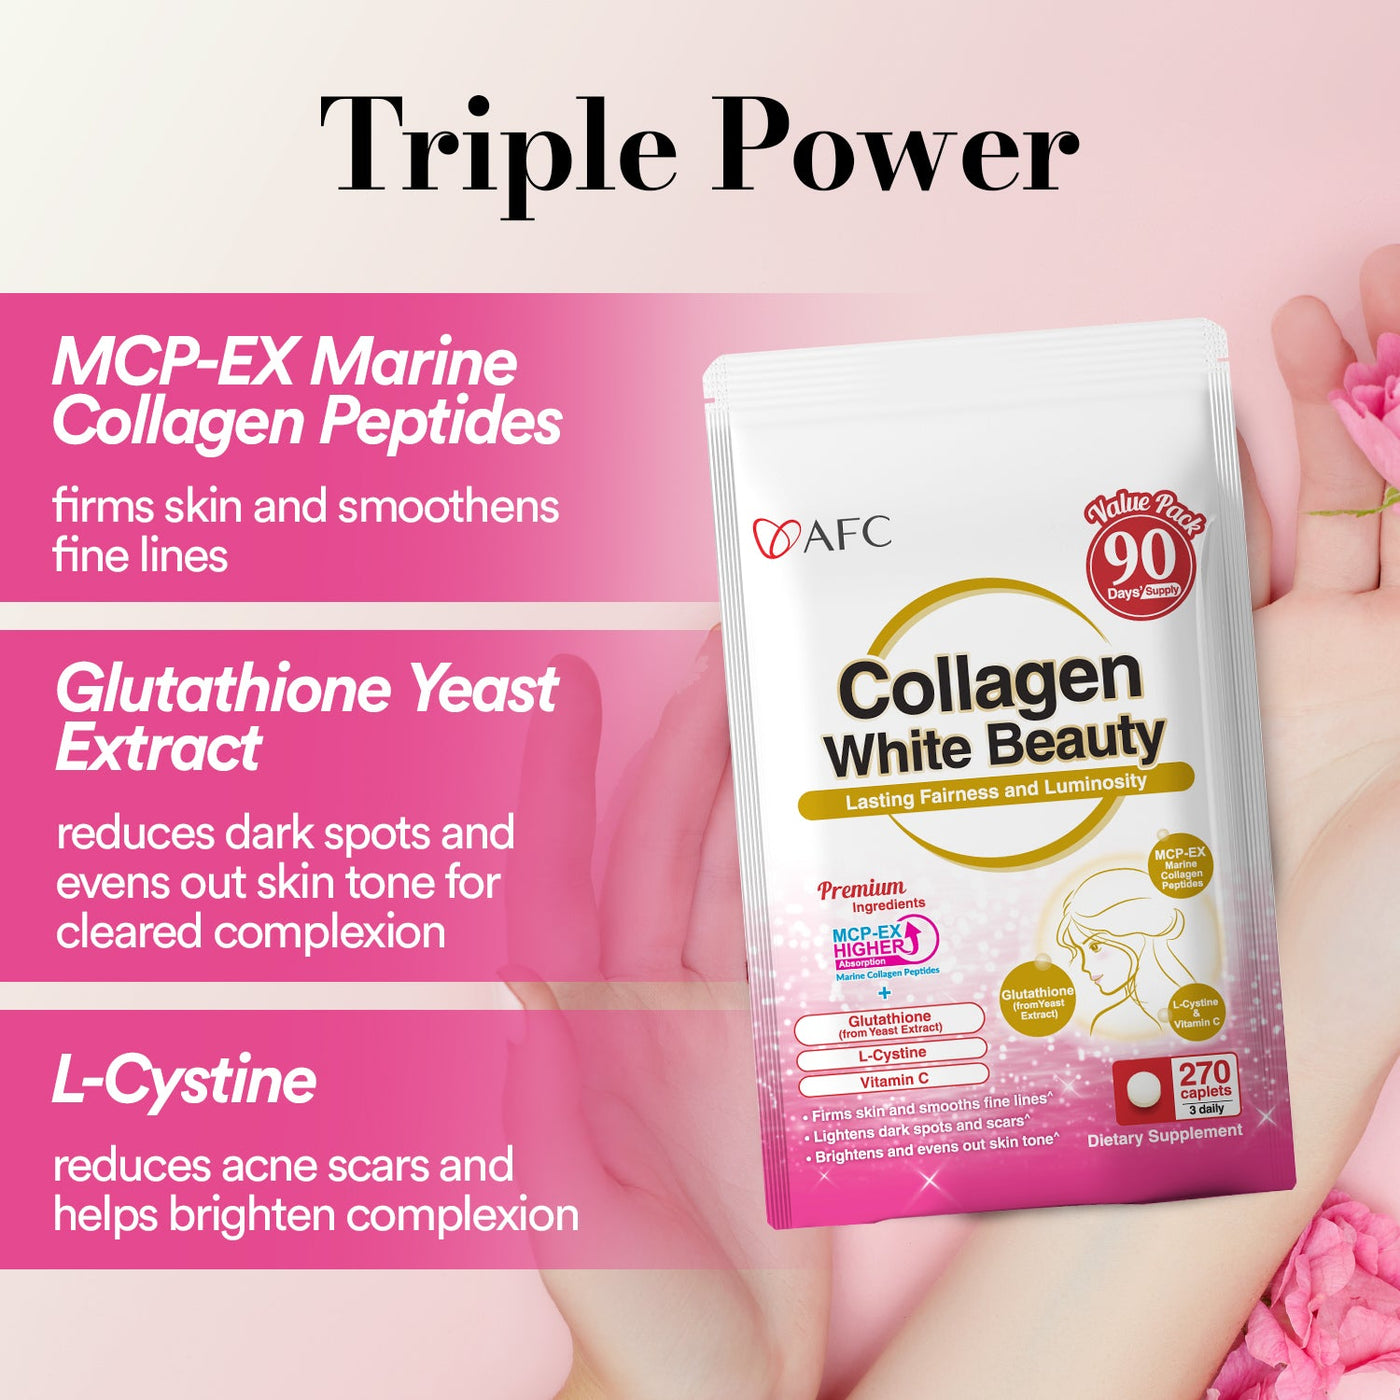 AFC Japan Collagen White Beauty with Marine Collagen Peptide, Glutathione, L-Cystine - 1.5X Better Absorption– for Skin Firmness & Whitening - Lifestream Group US